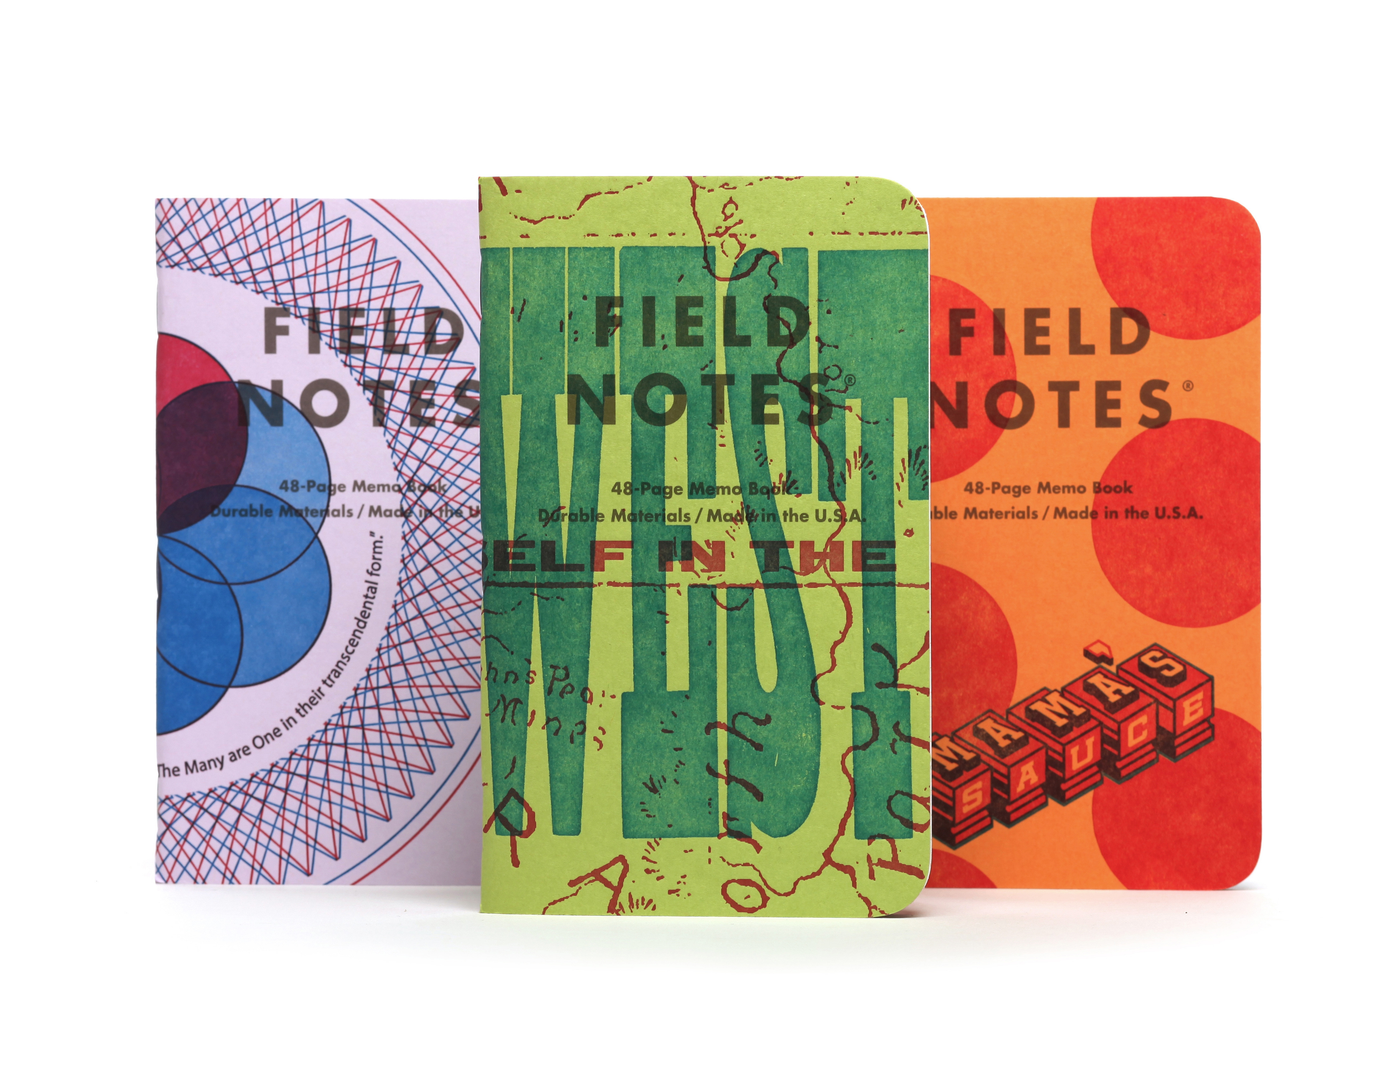 Pocket-sized notebooks from Field Notes, made in USA. These well know journals and guides are great for preserving memories and information about a wide variety of subjects, check out our selection and Vanness1938